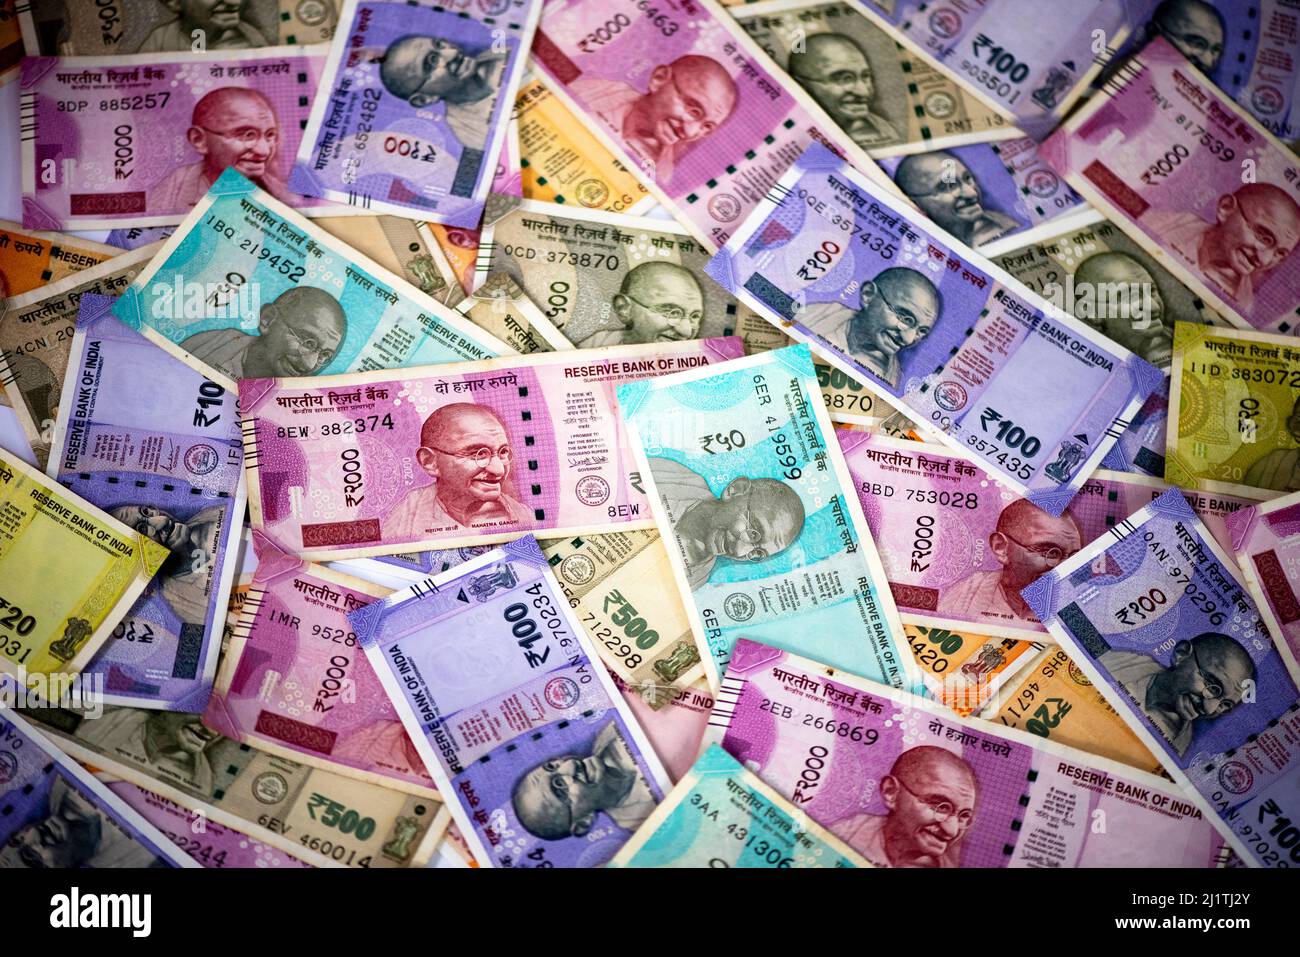 Cash in various Indian Paper Currency (rupees) as a background. Indian banknotes. Stock Photo